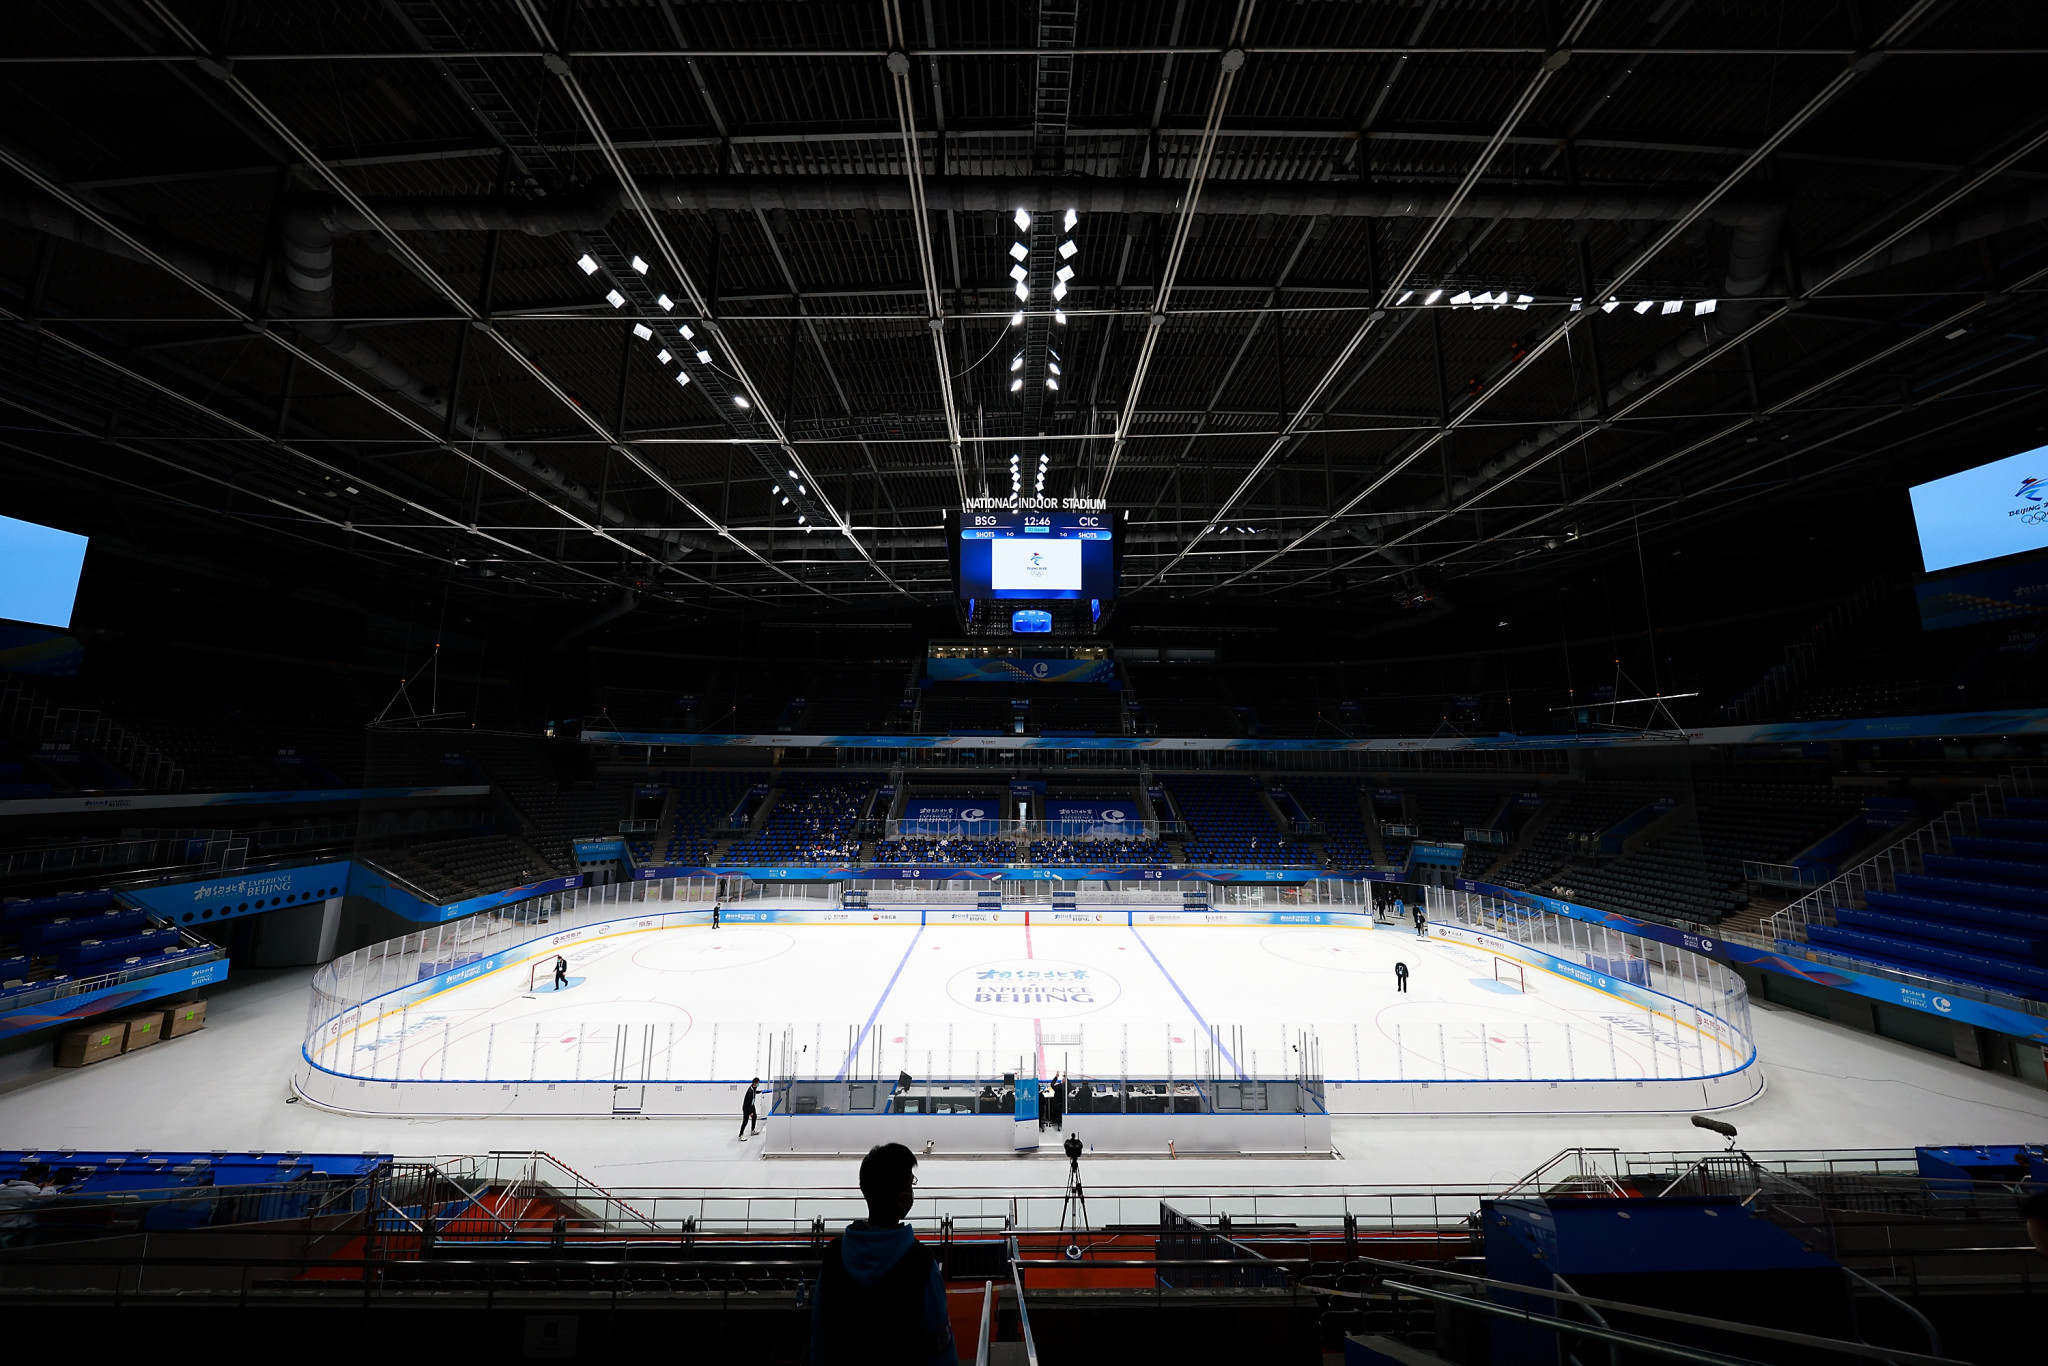 A Beijing 2022 men's ice hockey warm-up match between the Russian Olympic Committee and Latvia will be held at the Beijing National Indoor Stadium on February 5 ©Getty Images